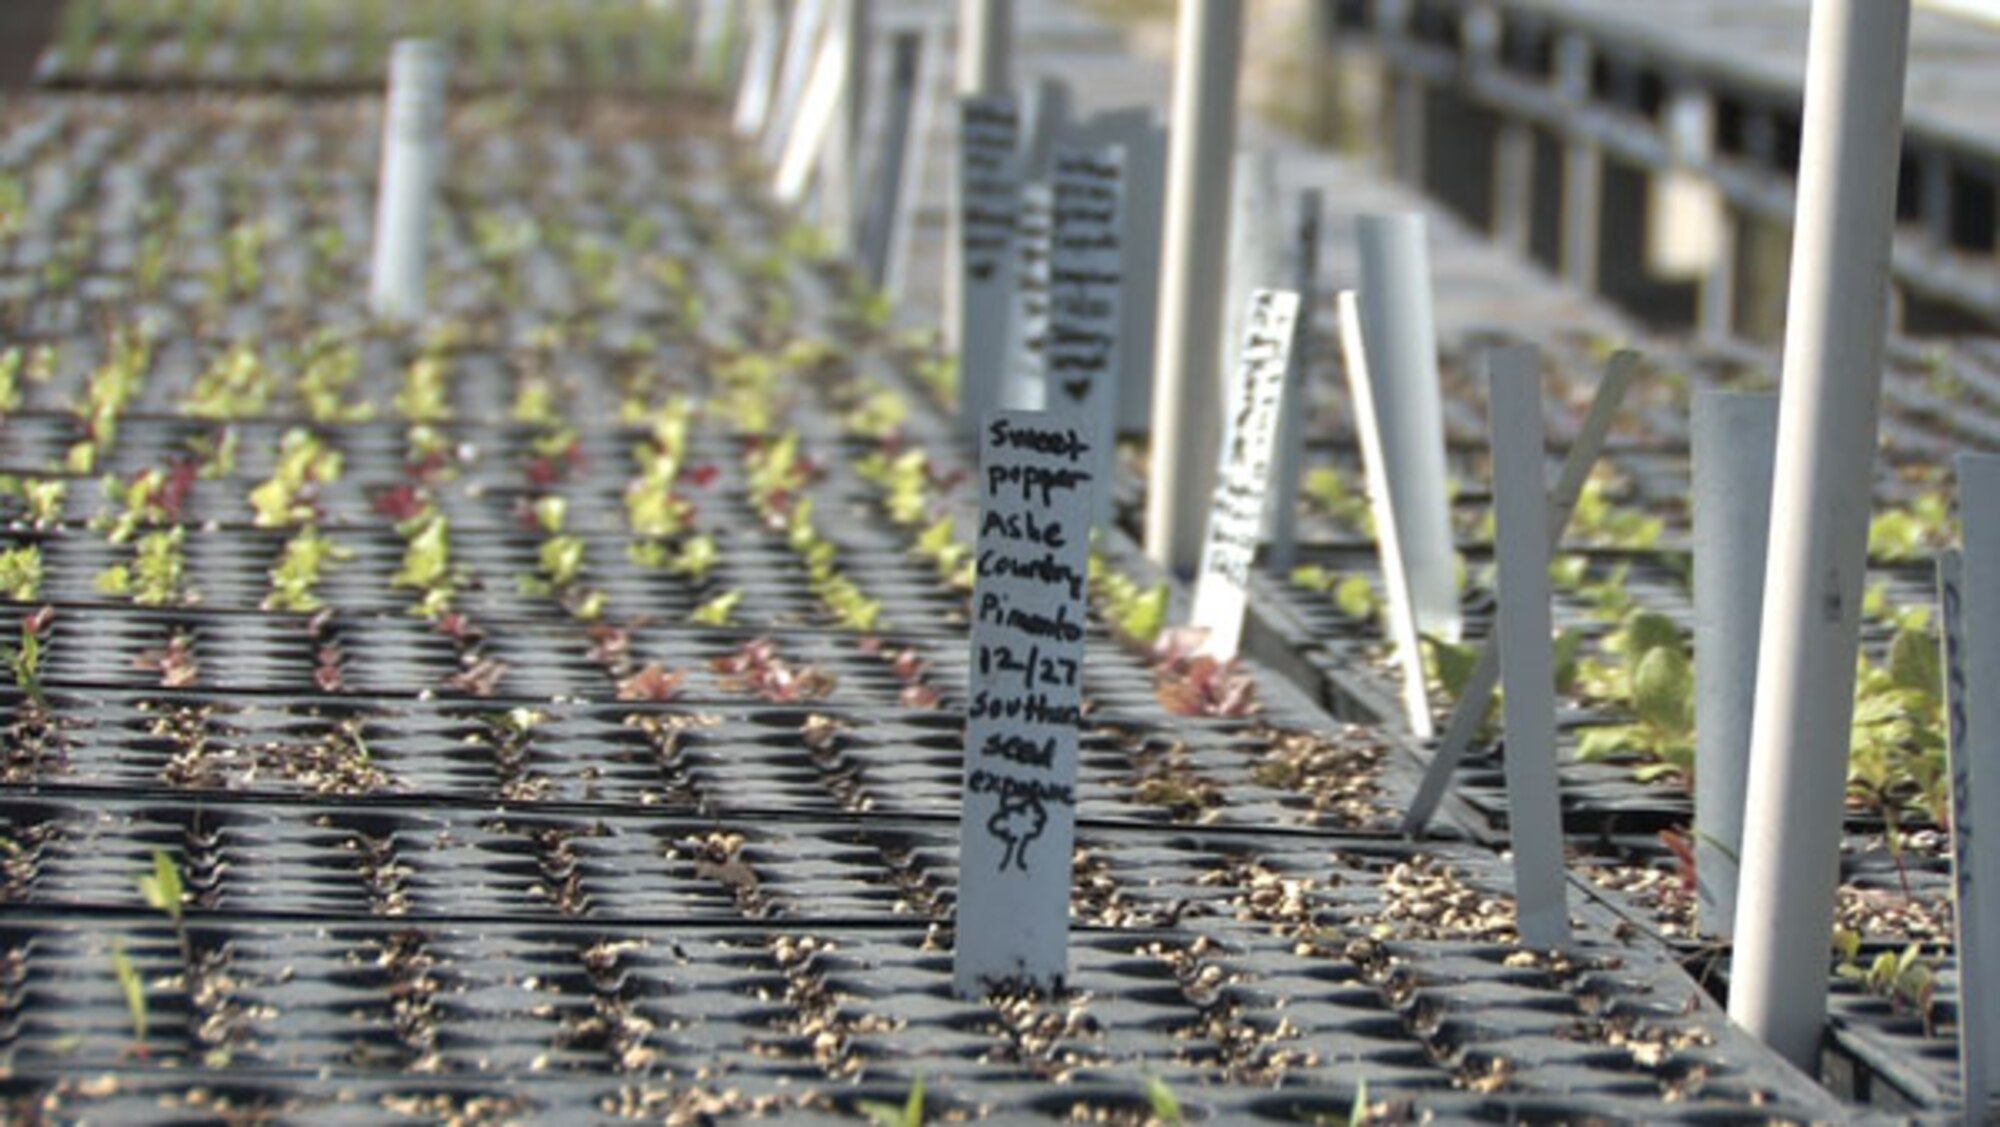 Sprouting seedlings will be transplanted to a 22-acre organic farm, and eventually harvested and sold at a farmers market to benefit homeless people in Miami, Florida.  The Air Force transferred about 80 acres of the former Homestead Air Force Base to the Miami-Dade County Homeless Trust via a Public Benefit Conveyance to provide supportive housing, the farm,  and other amenities for homeless people in the area.  (Photo by Scott Johnston)